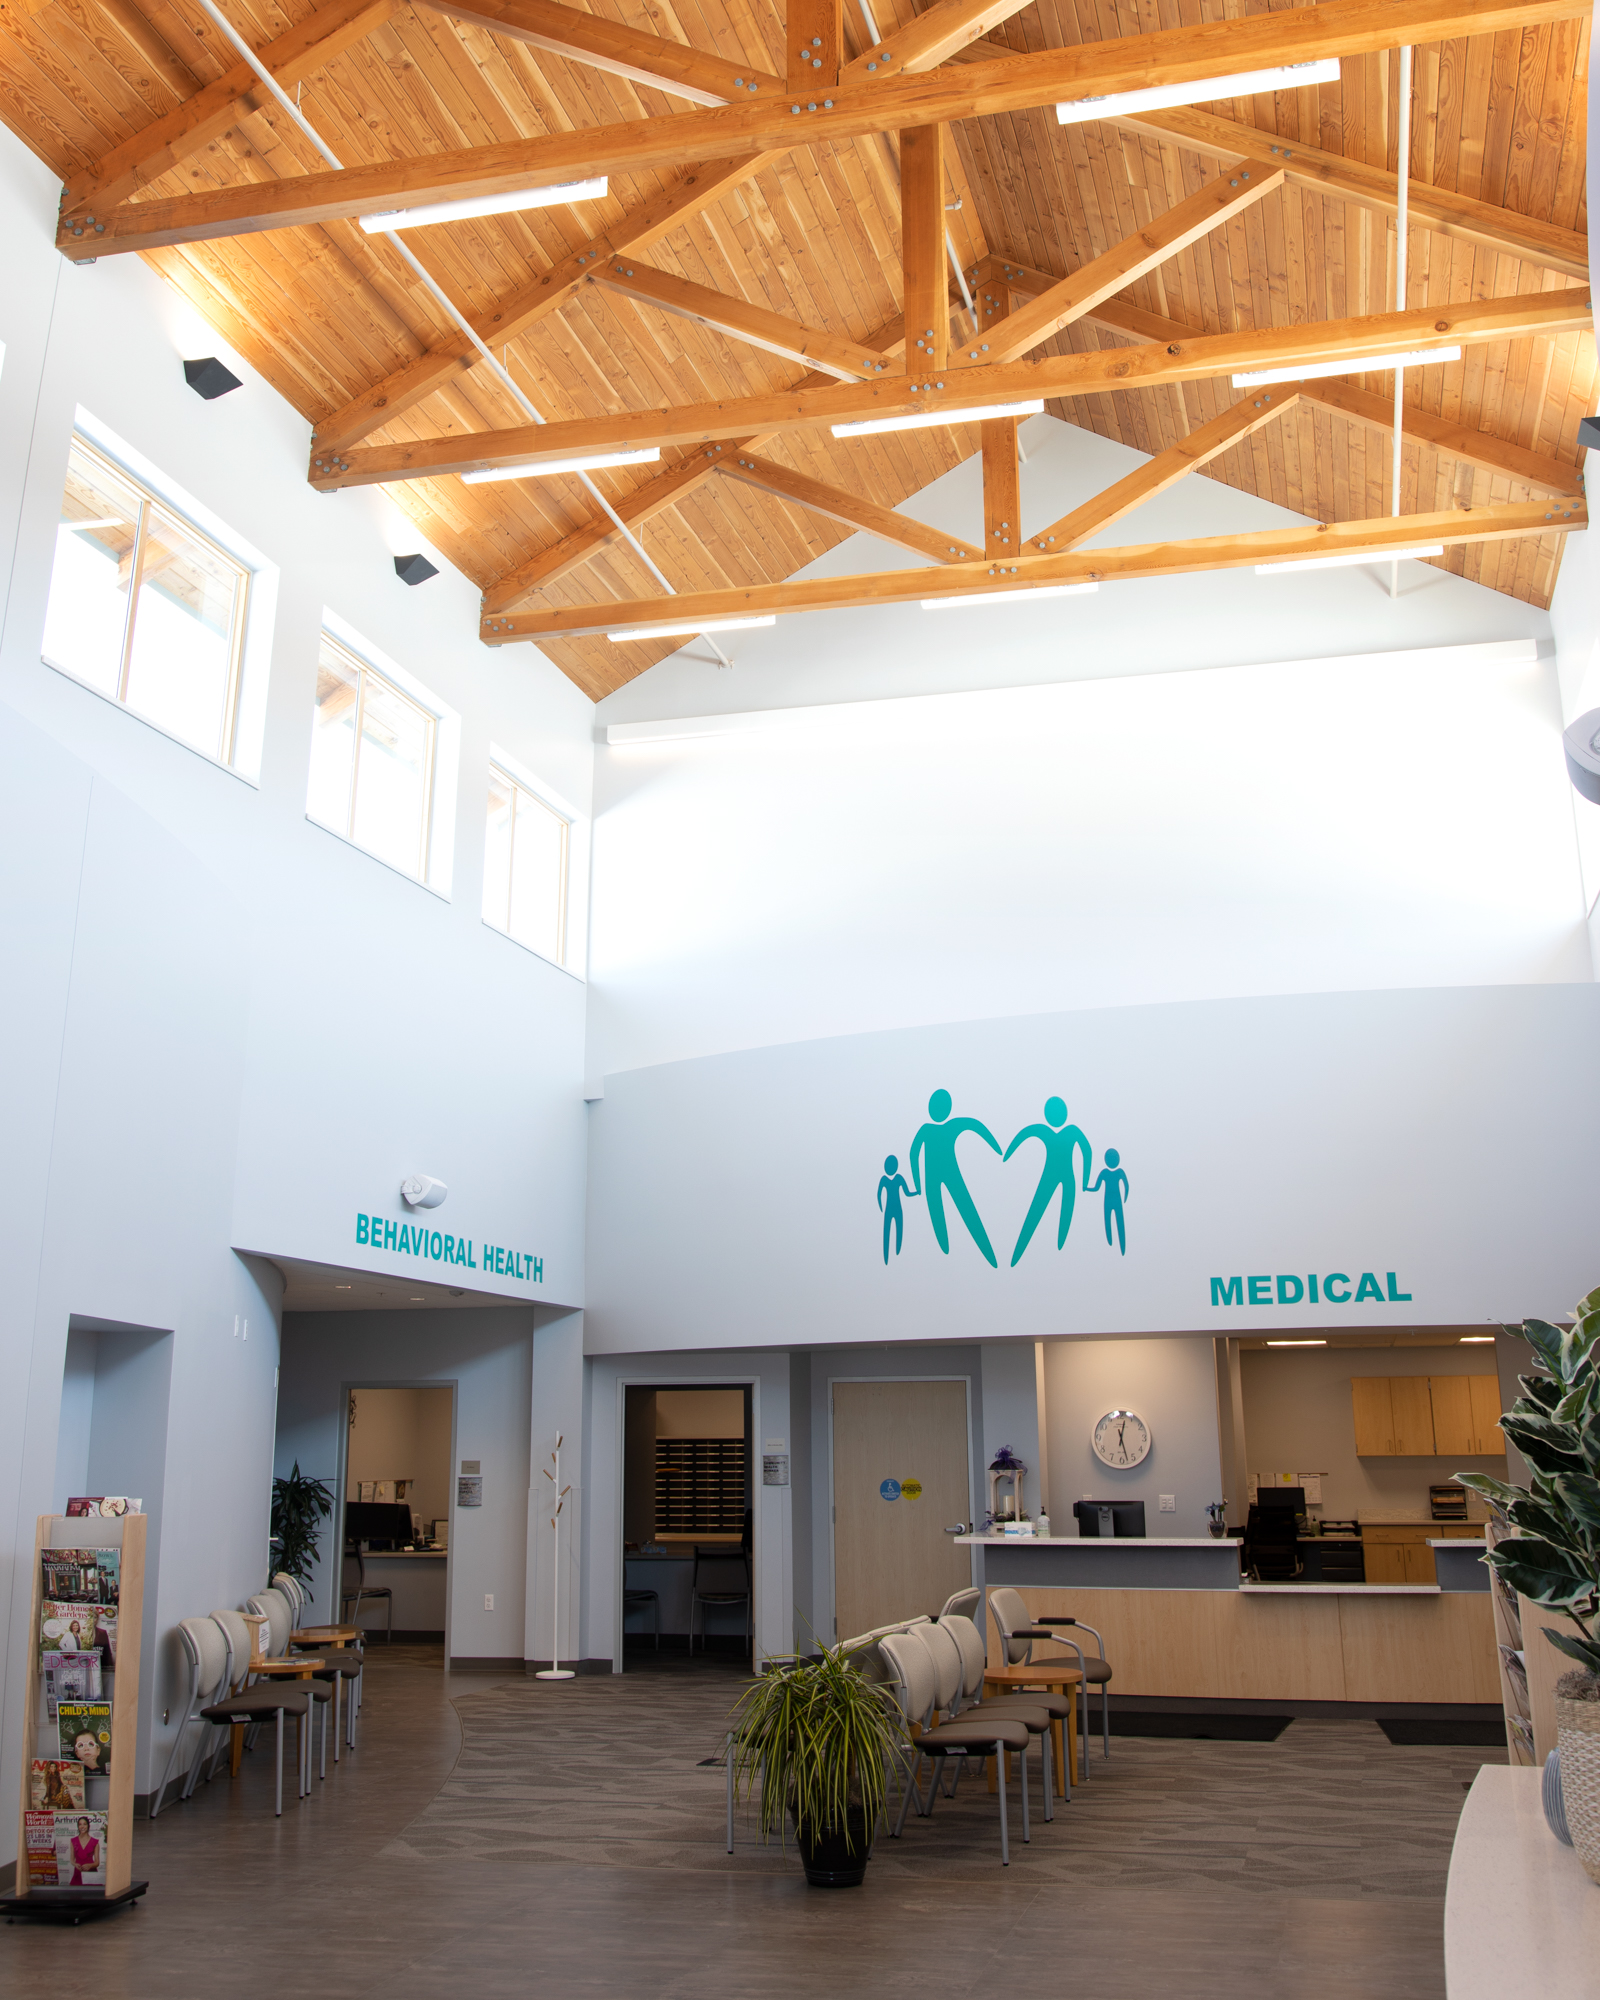 Wide shot of the lobby of a medical building.